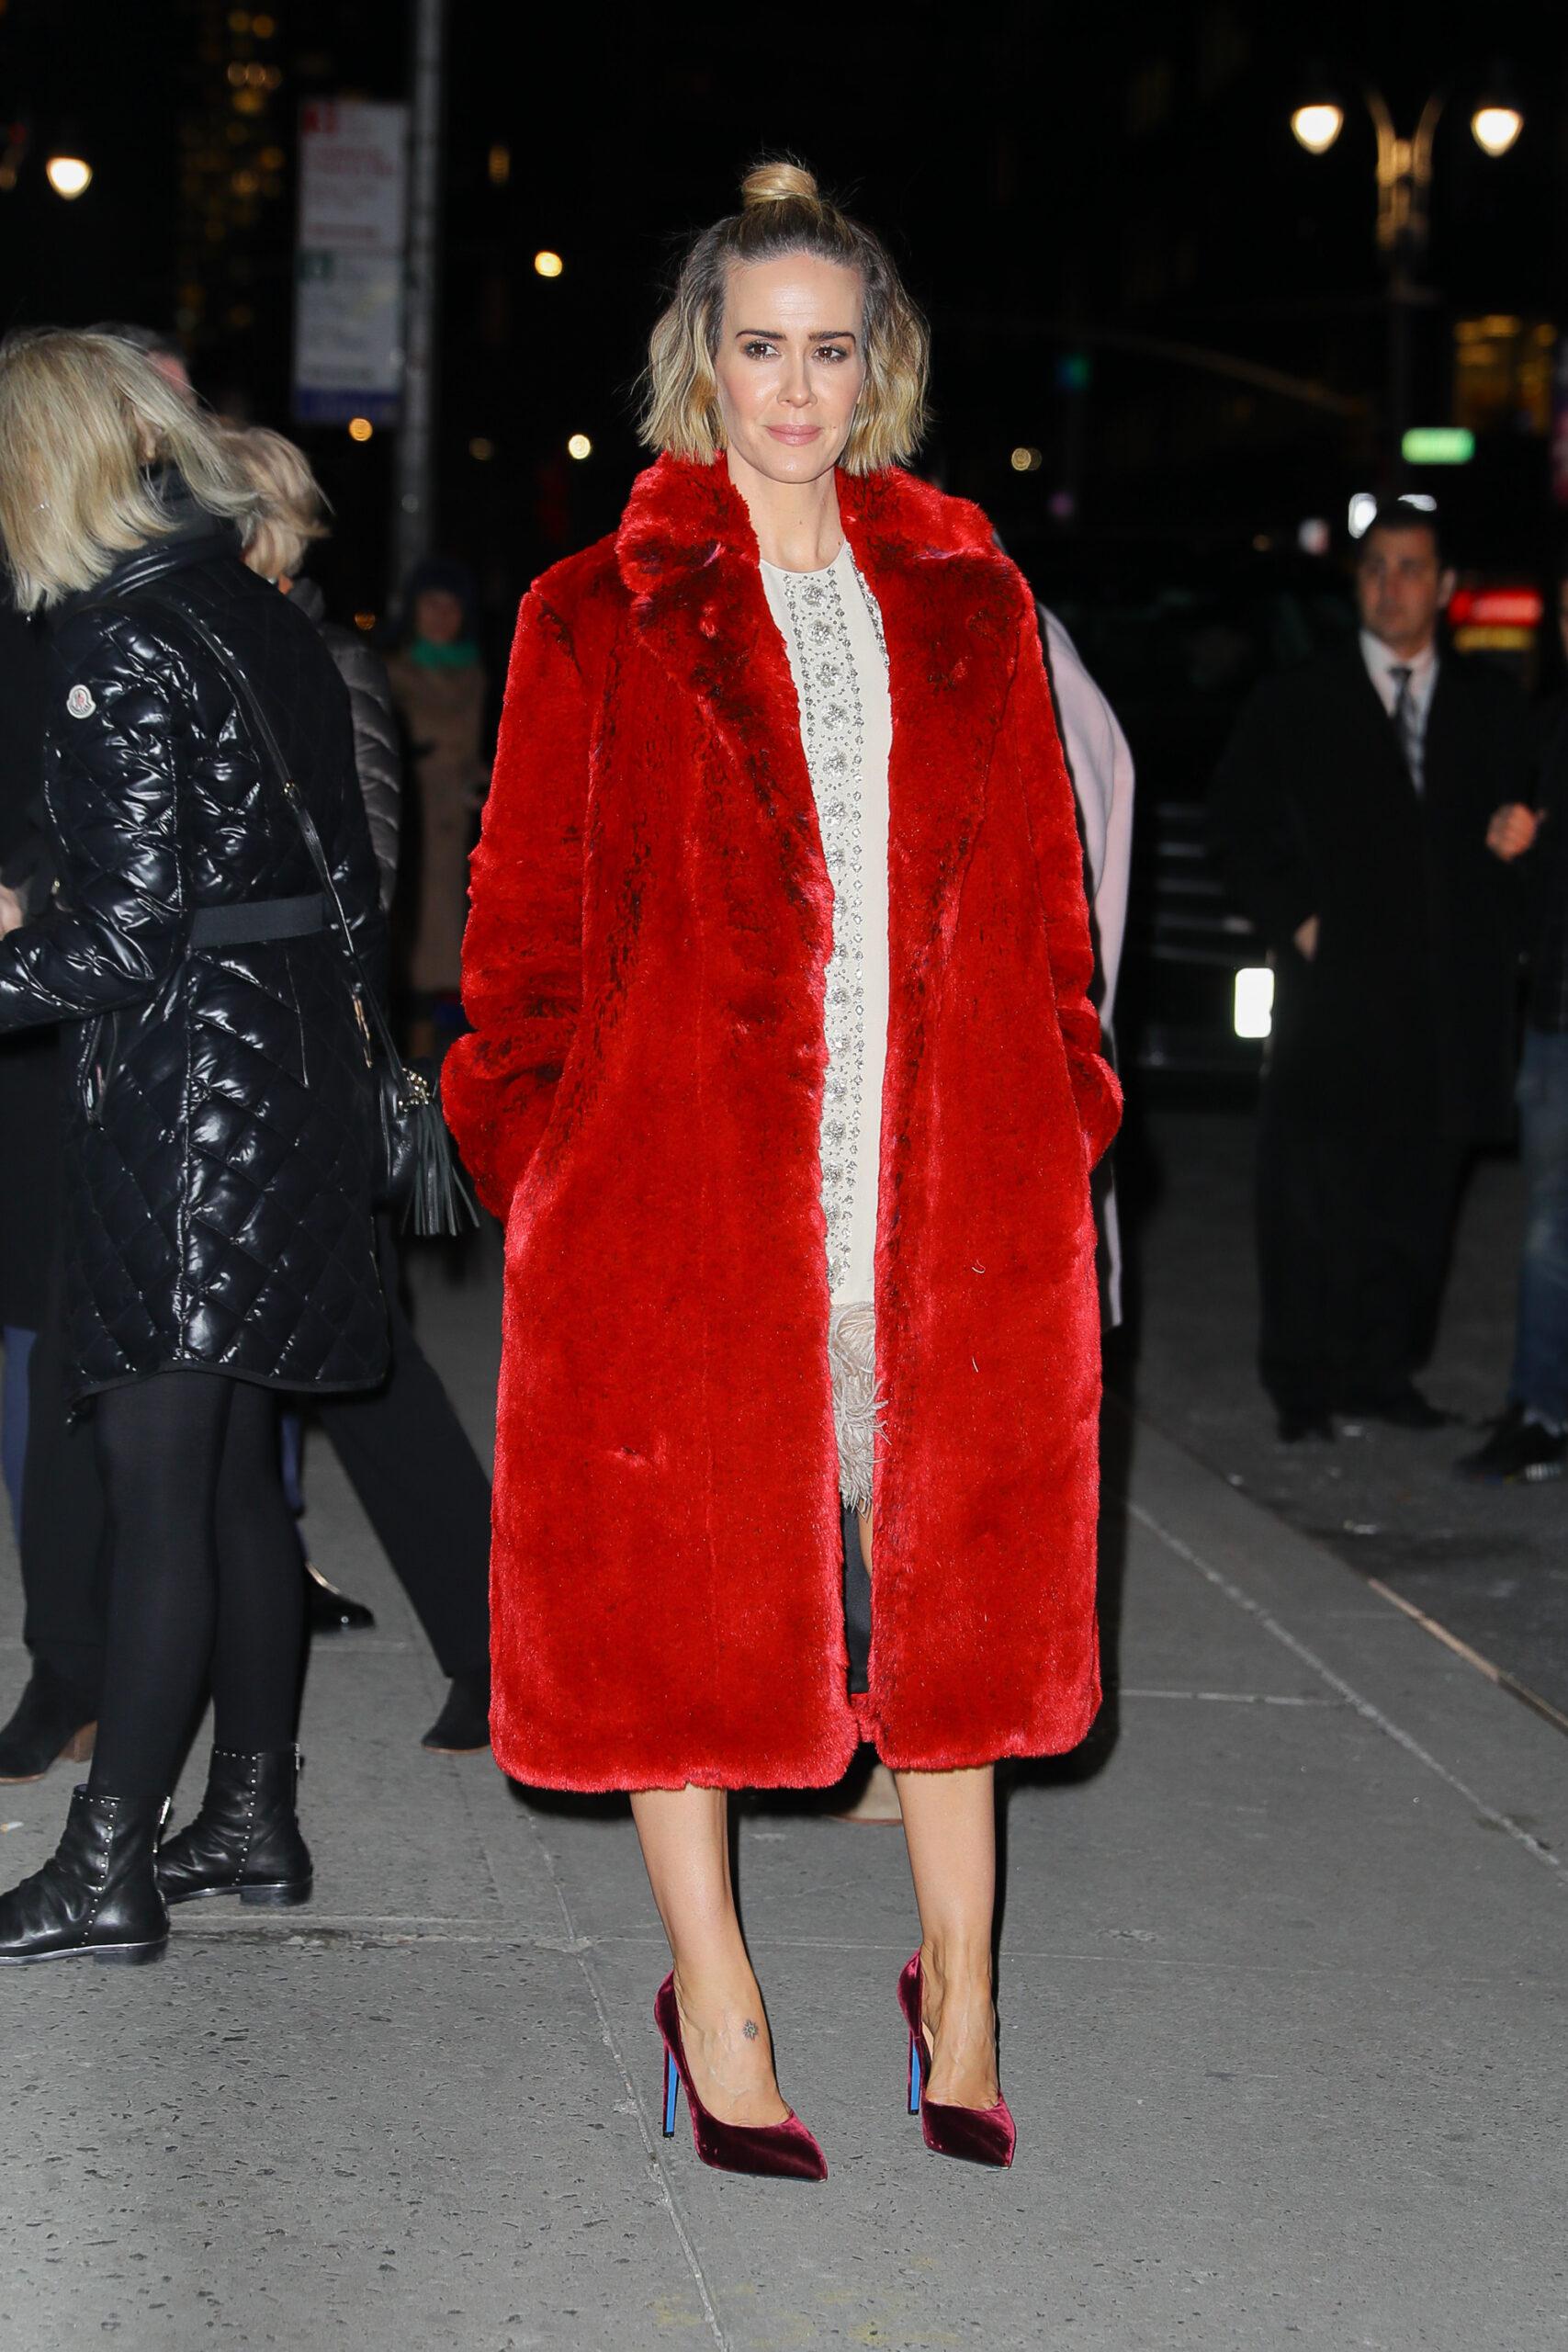 Sarah Paulson wears a red coat while arriving at The Late Show with Stephen Colbert in NYC on Jan 17 2019